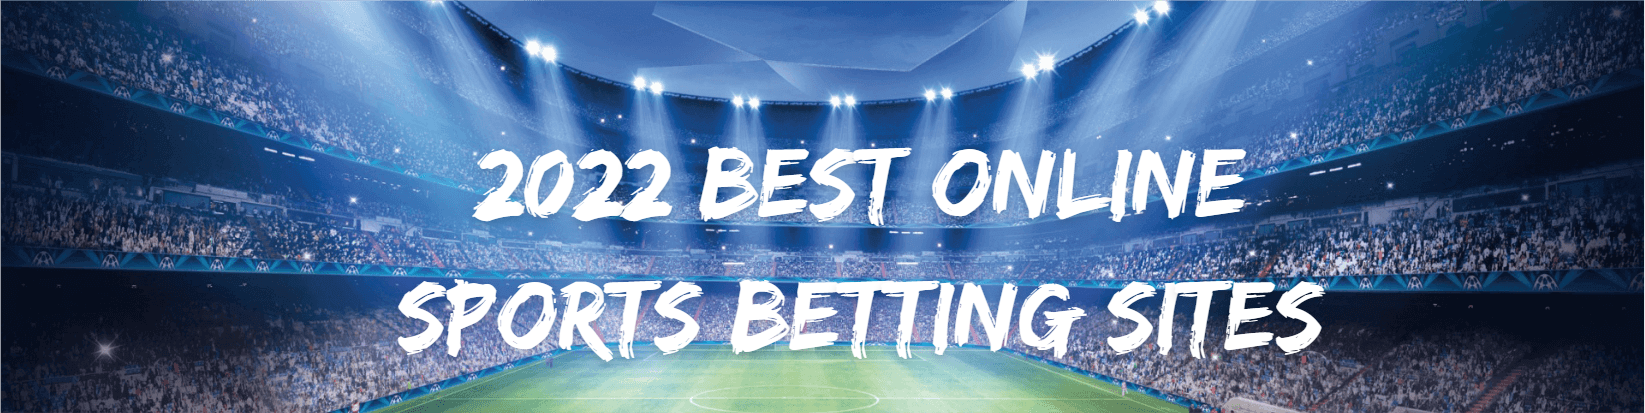 Best Online Sports Betting Sites in the Philippines